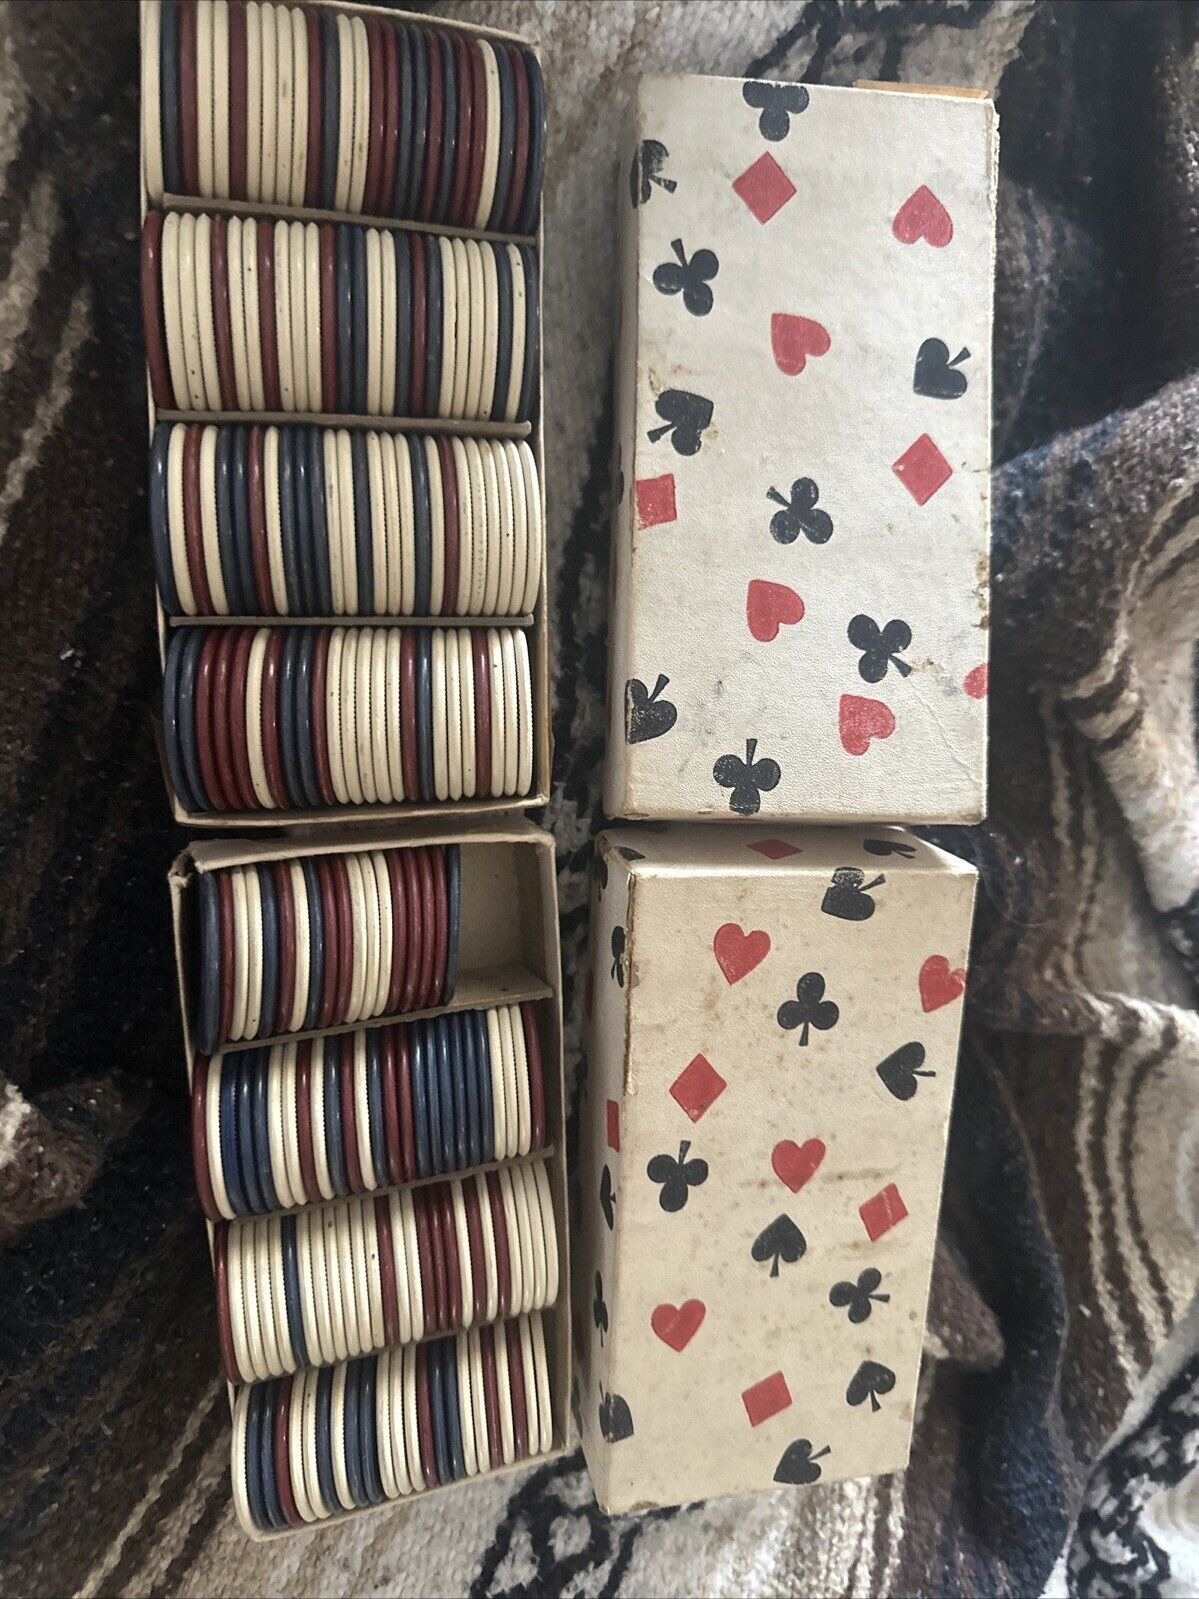 vintage poker chip set In Original Box Rare Collectible Poker ￼ hold  five Card